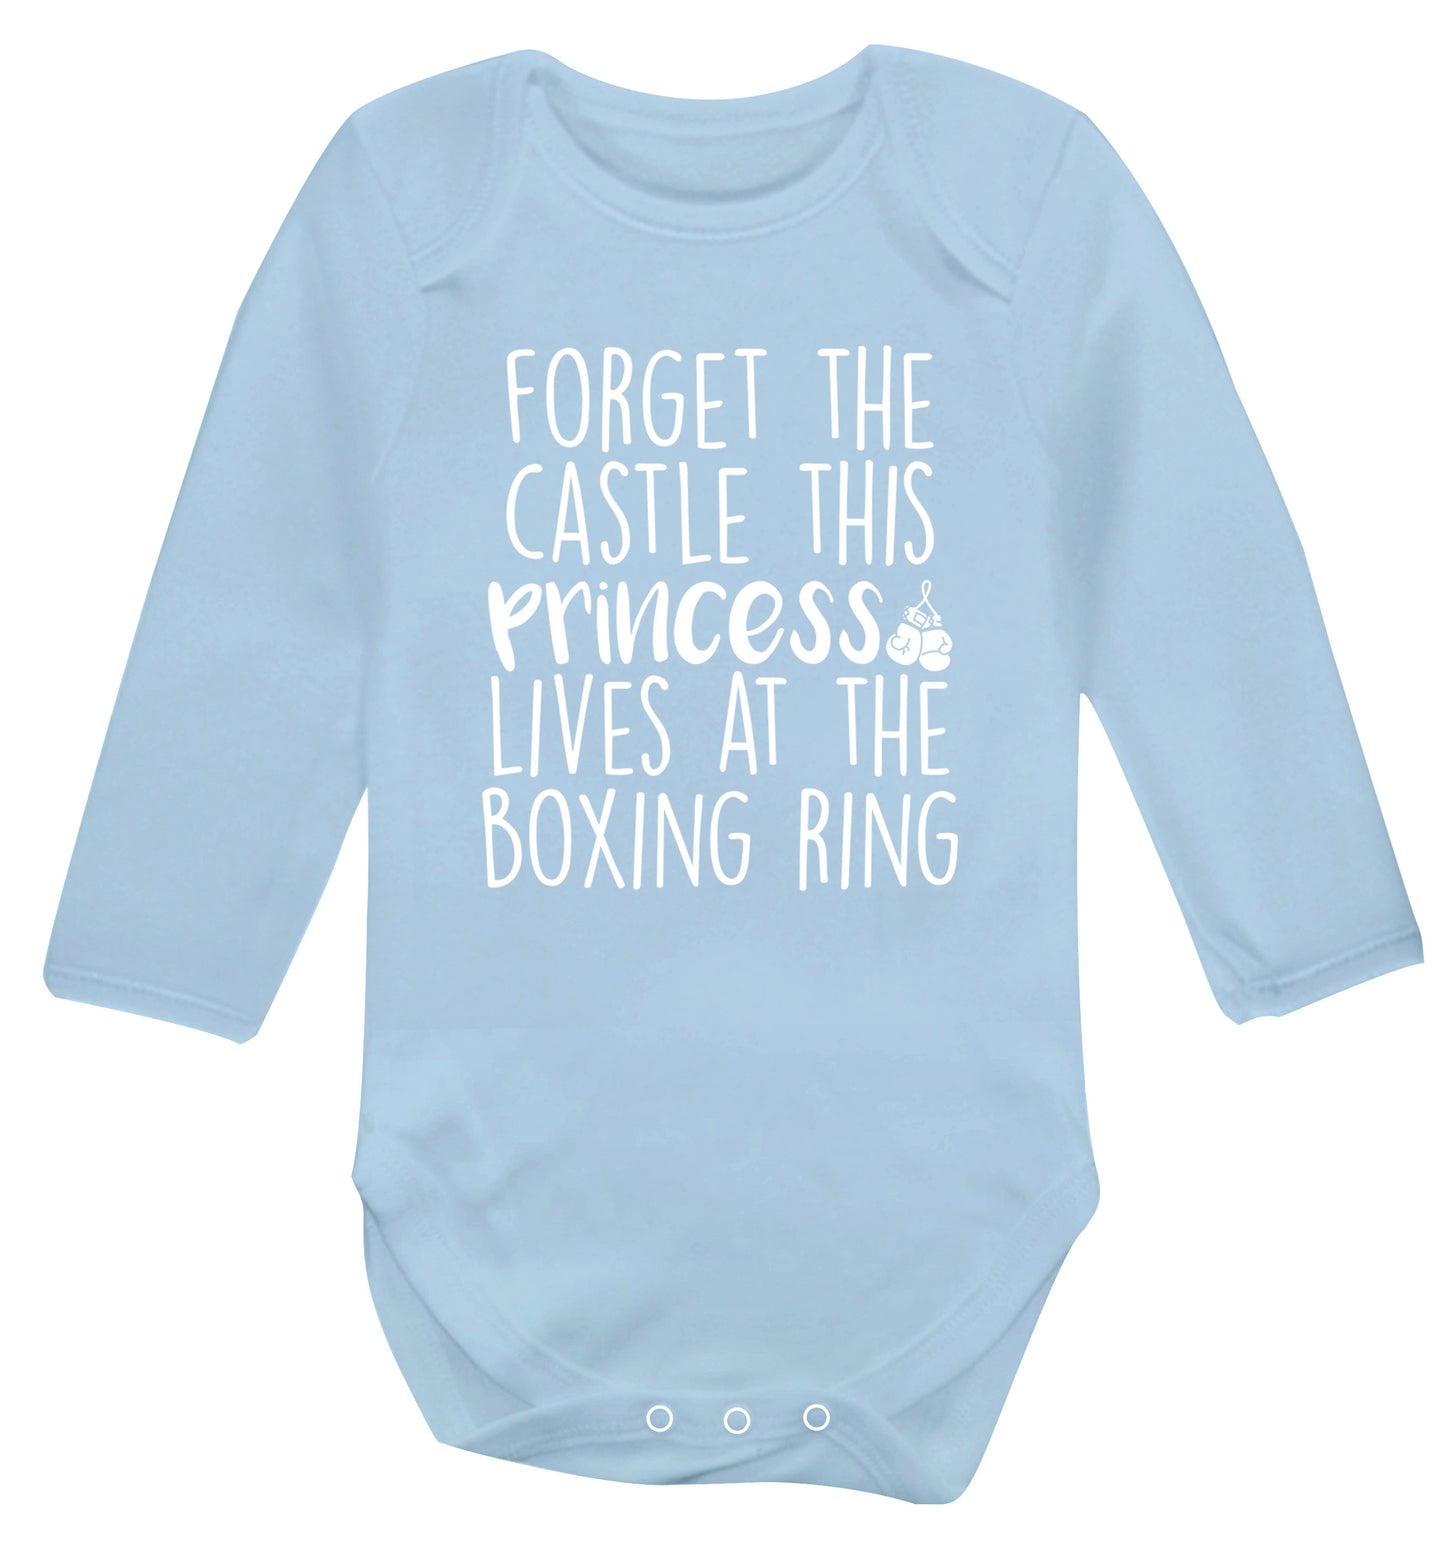 Forget the castle this princess lives at the boxing ring Baby Vest long sleeved pale blue 6-12 months